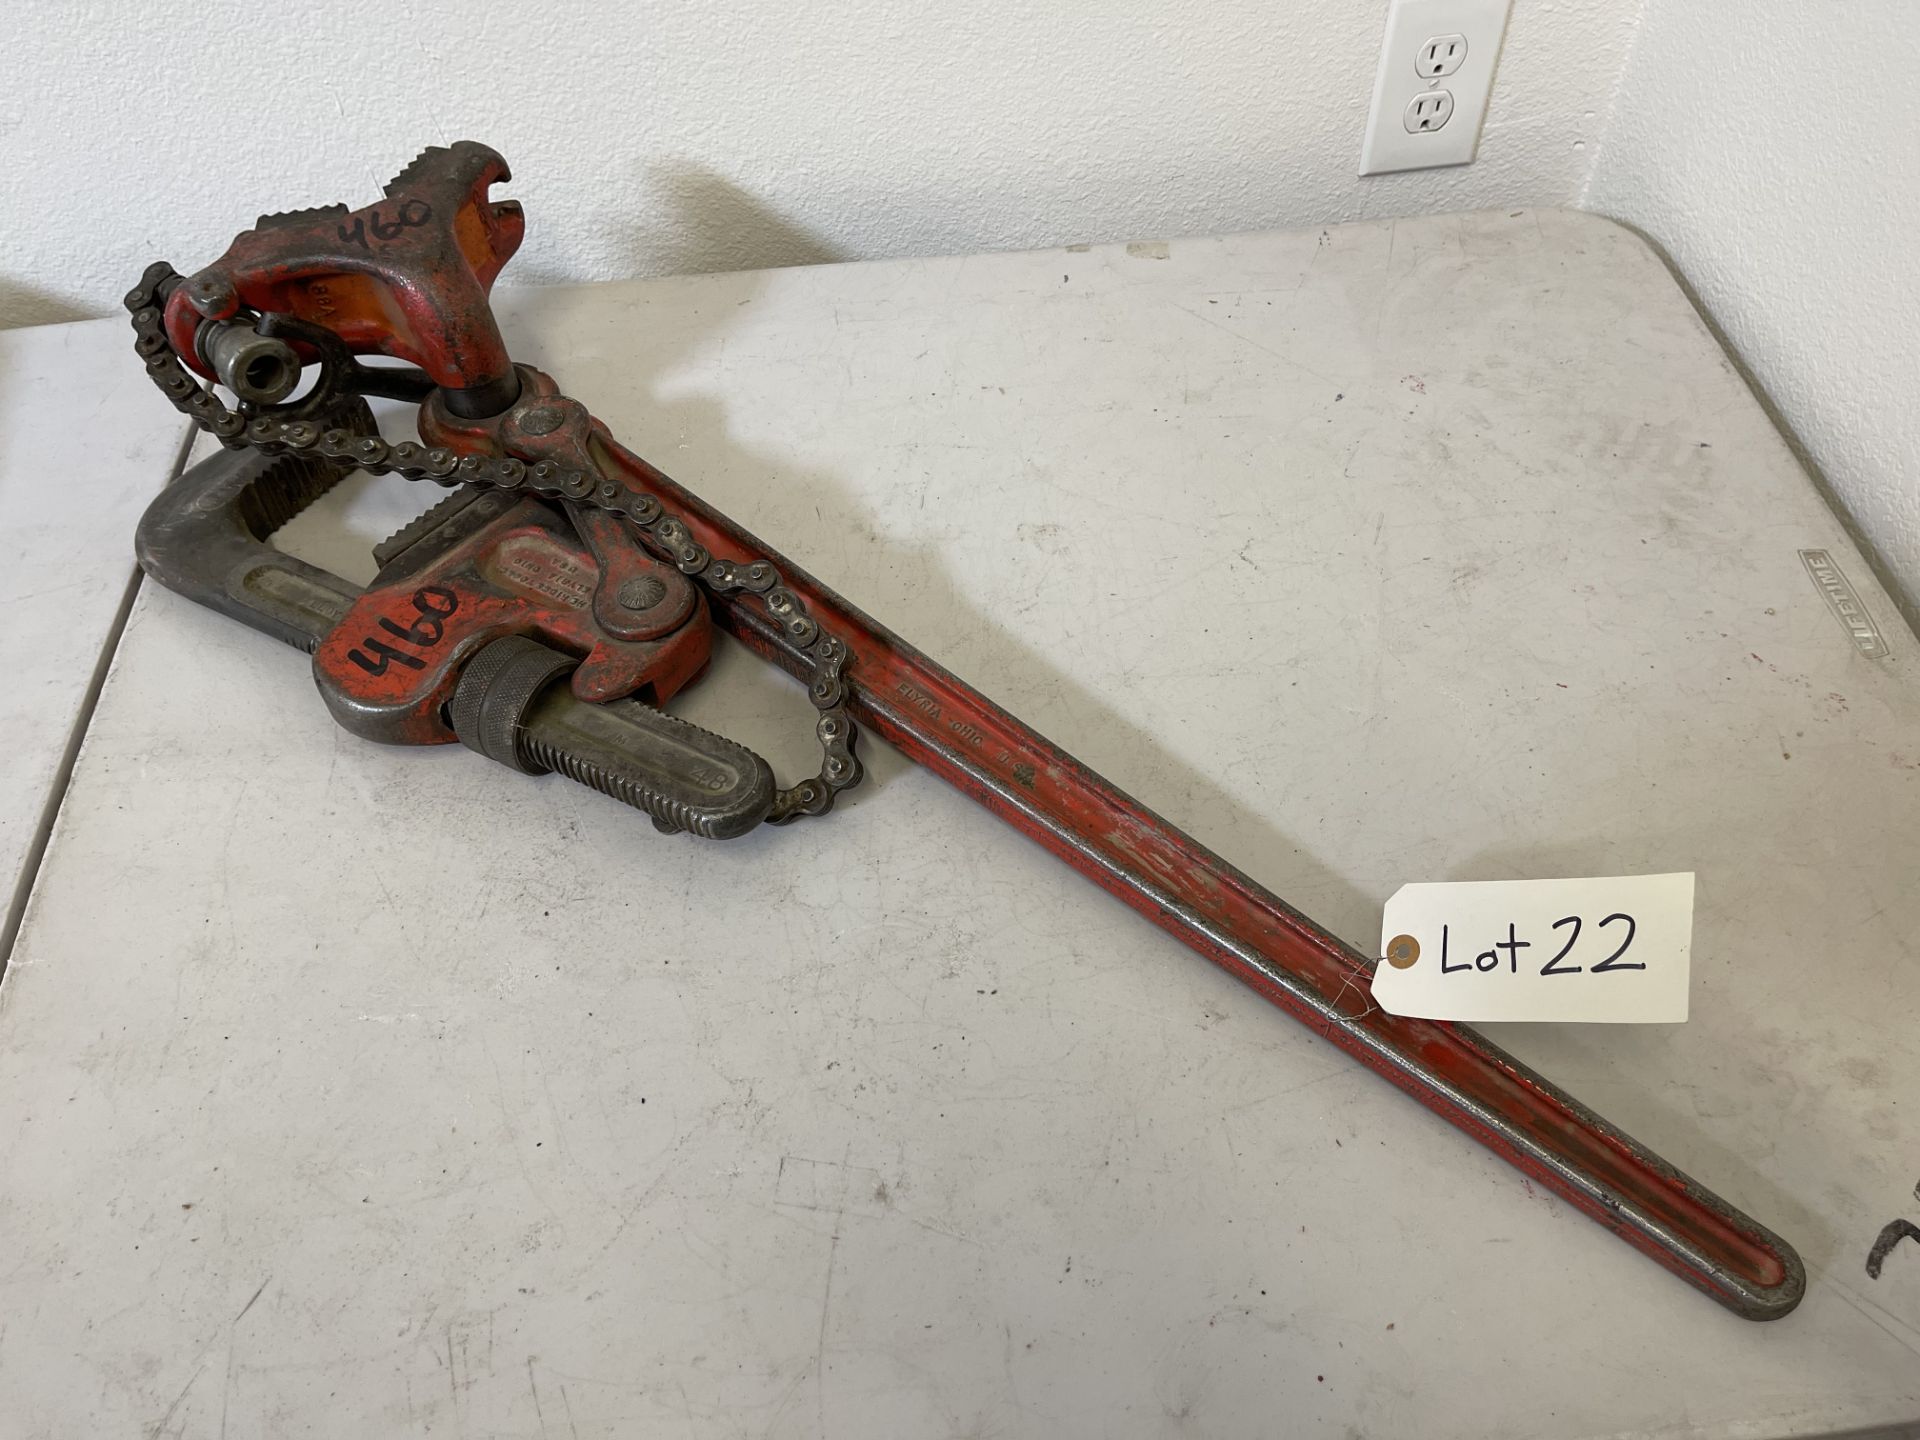 Ridgid large compound pipe wrench with vise